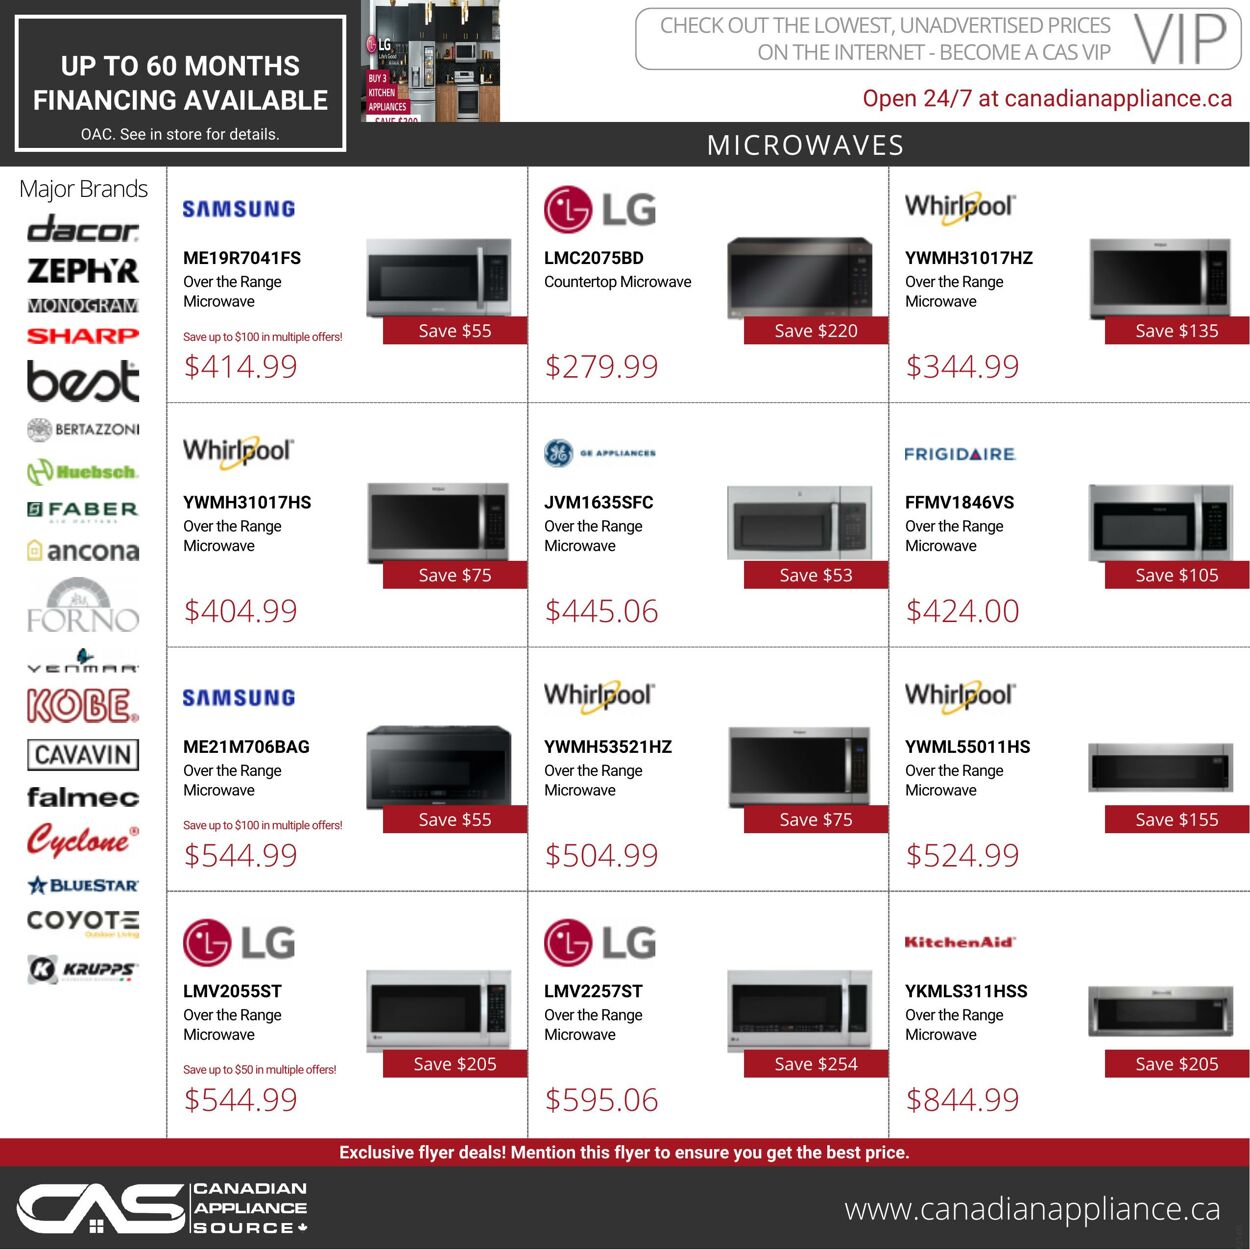 Flyer Canadian Appliance Source 02.12.2021 - 08.12.2021